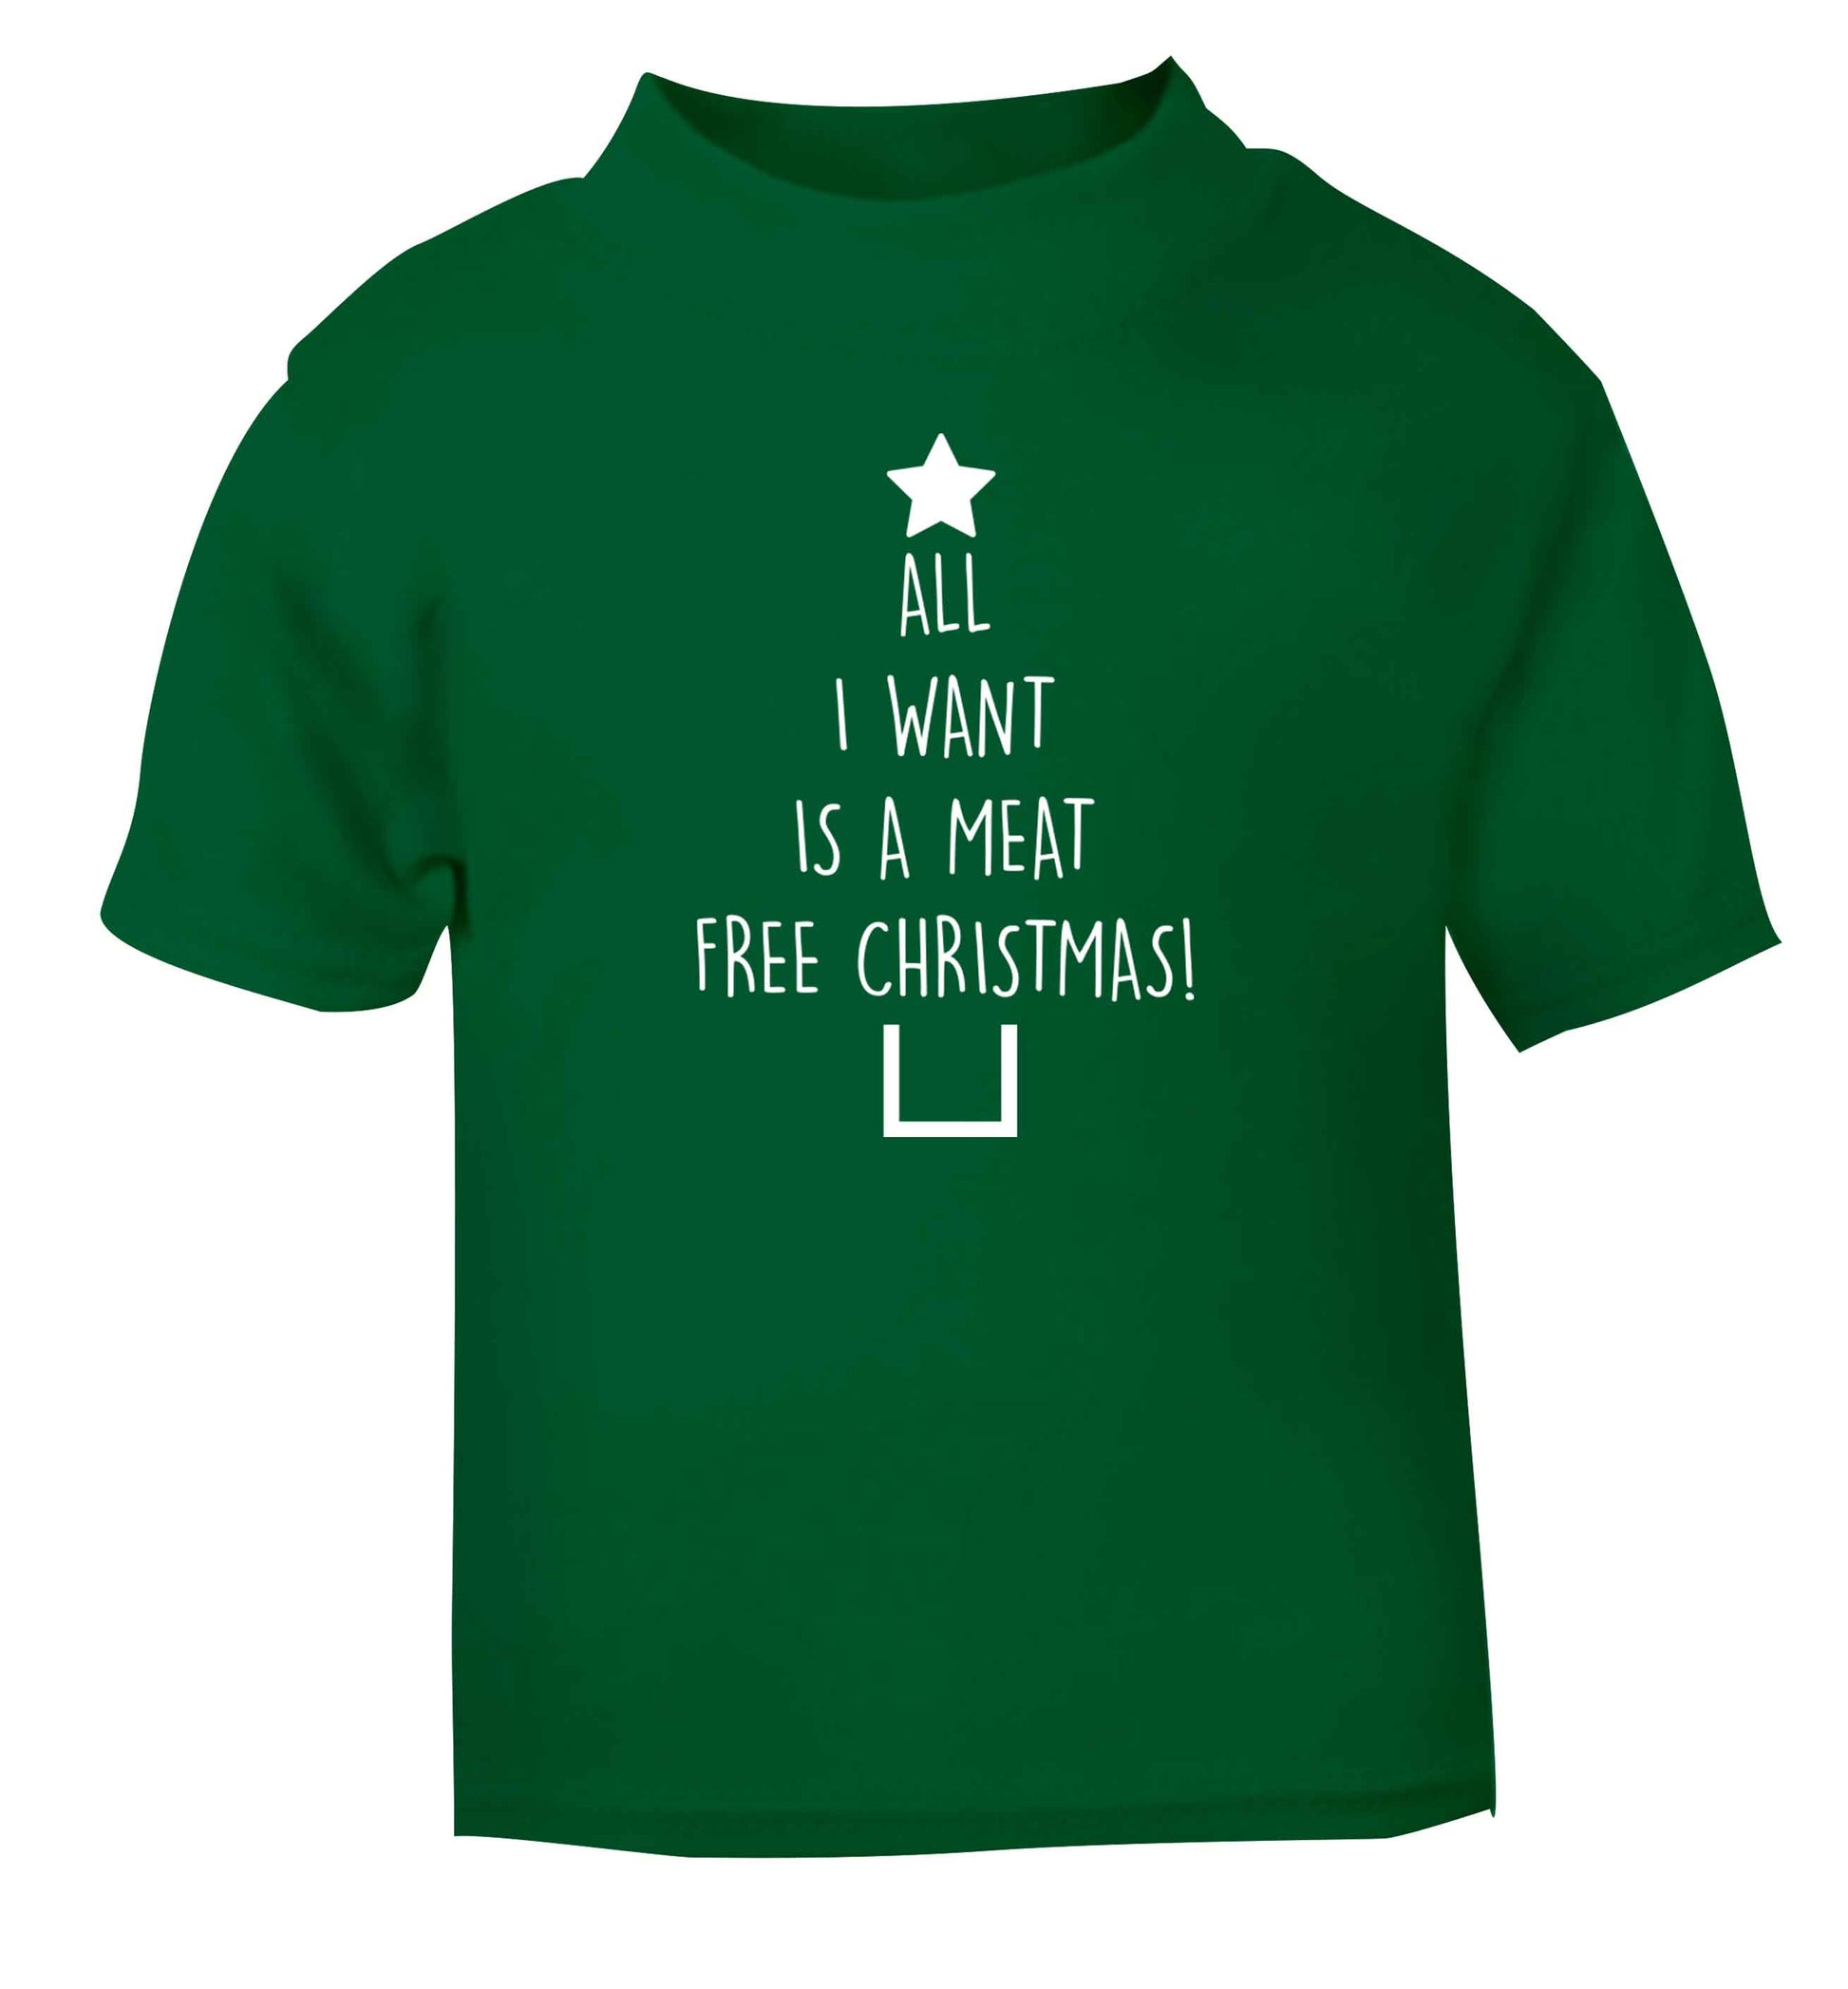 All I want is a meat free Christmas green Baby Toddler Tshirt 2 Years